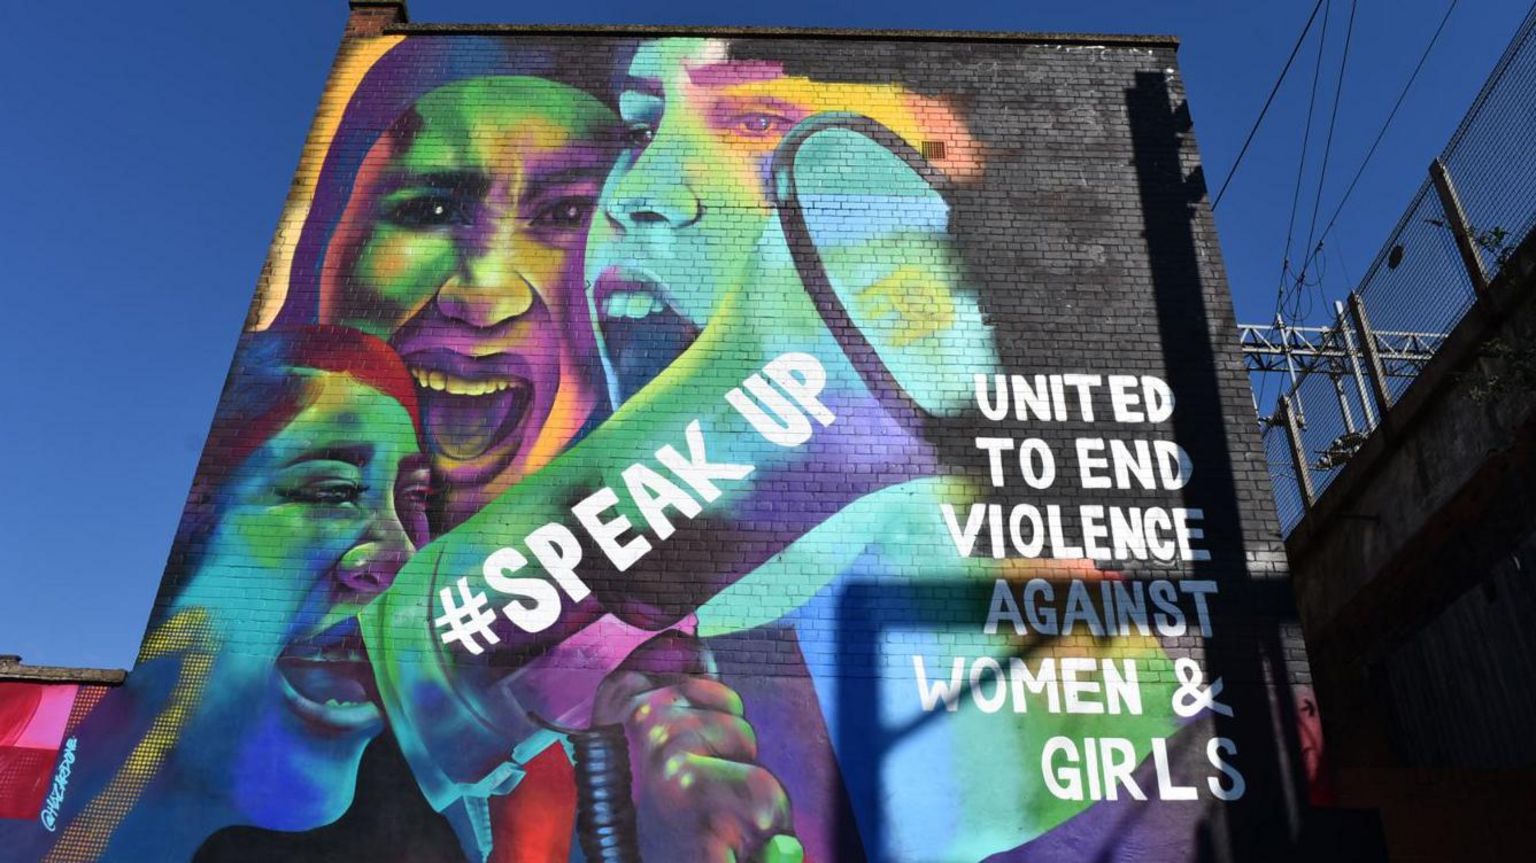 A mural of women with a megaphone which says 'speak up' and text which says 'united to end violence against women and girls'